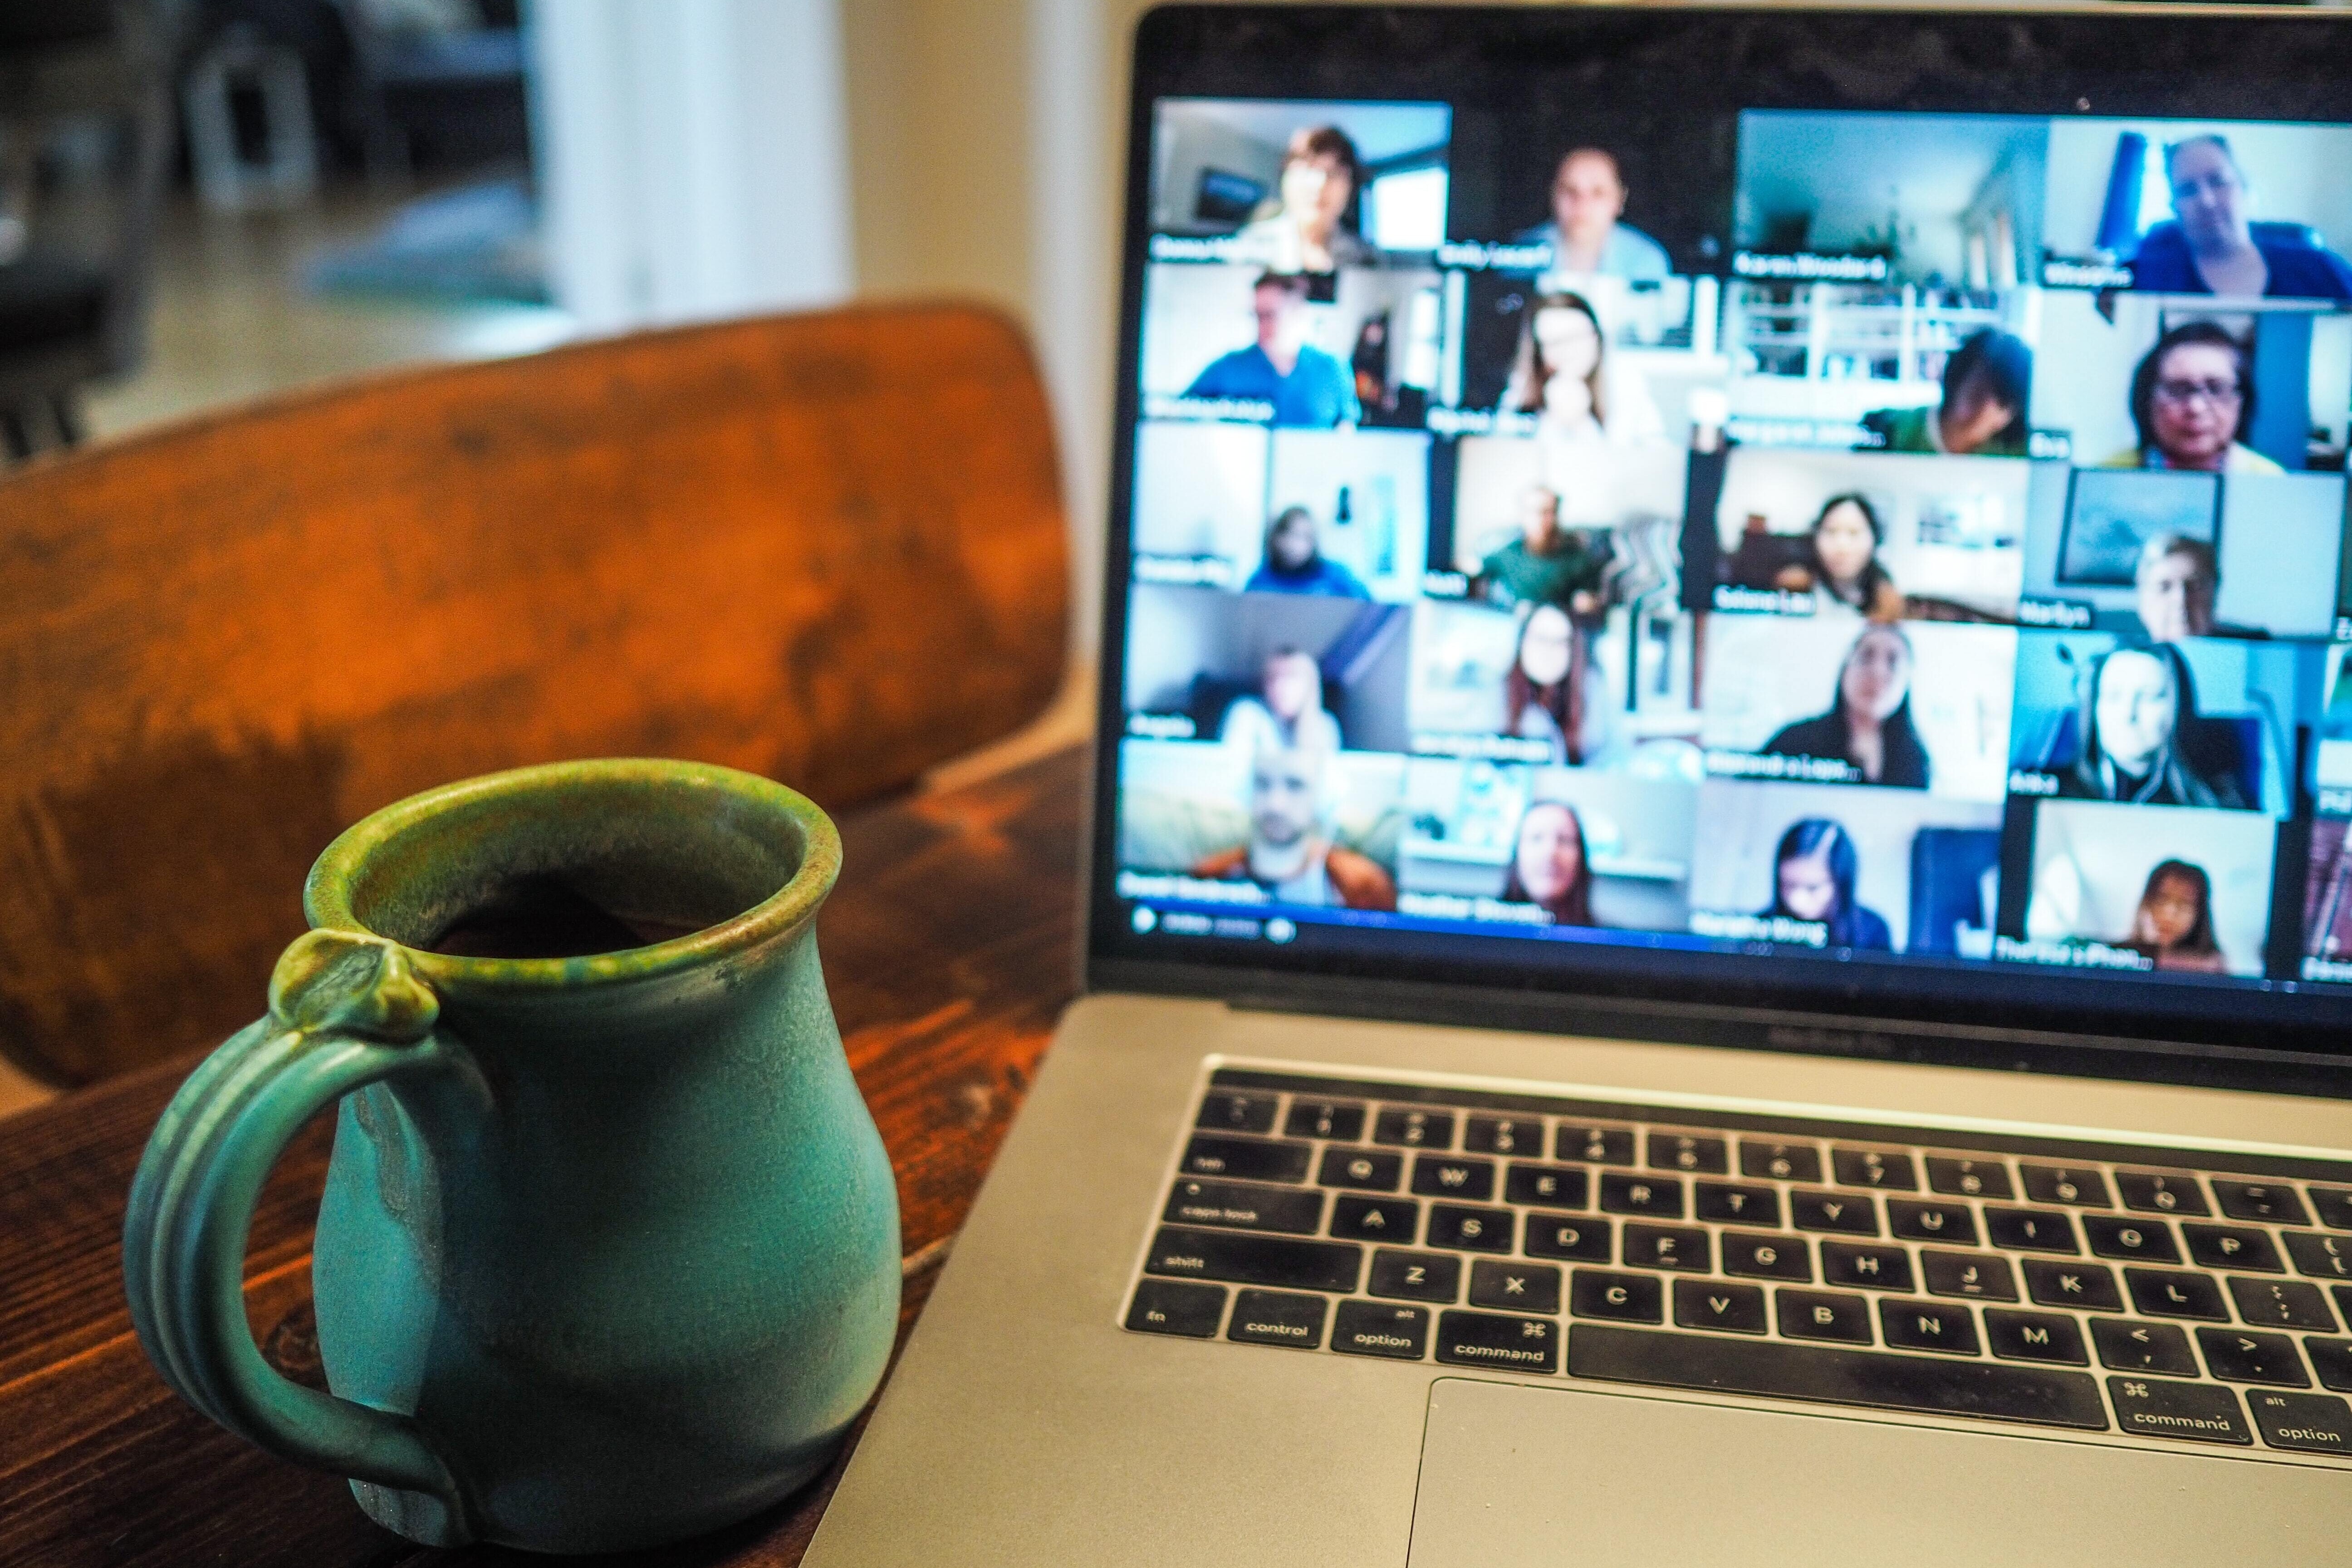 Closeup open laptop showing multiple person video conference and green ceramic coffee mug on wooden table